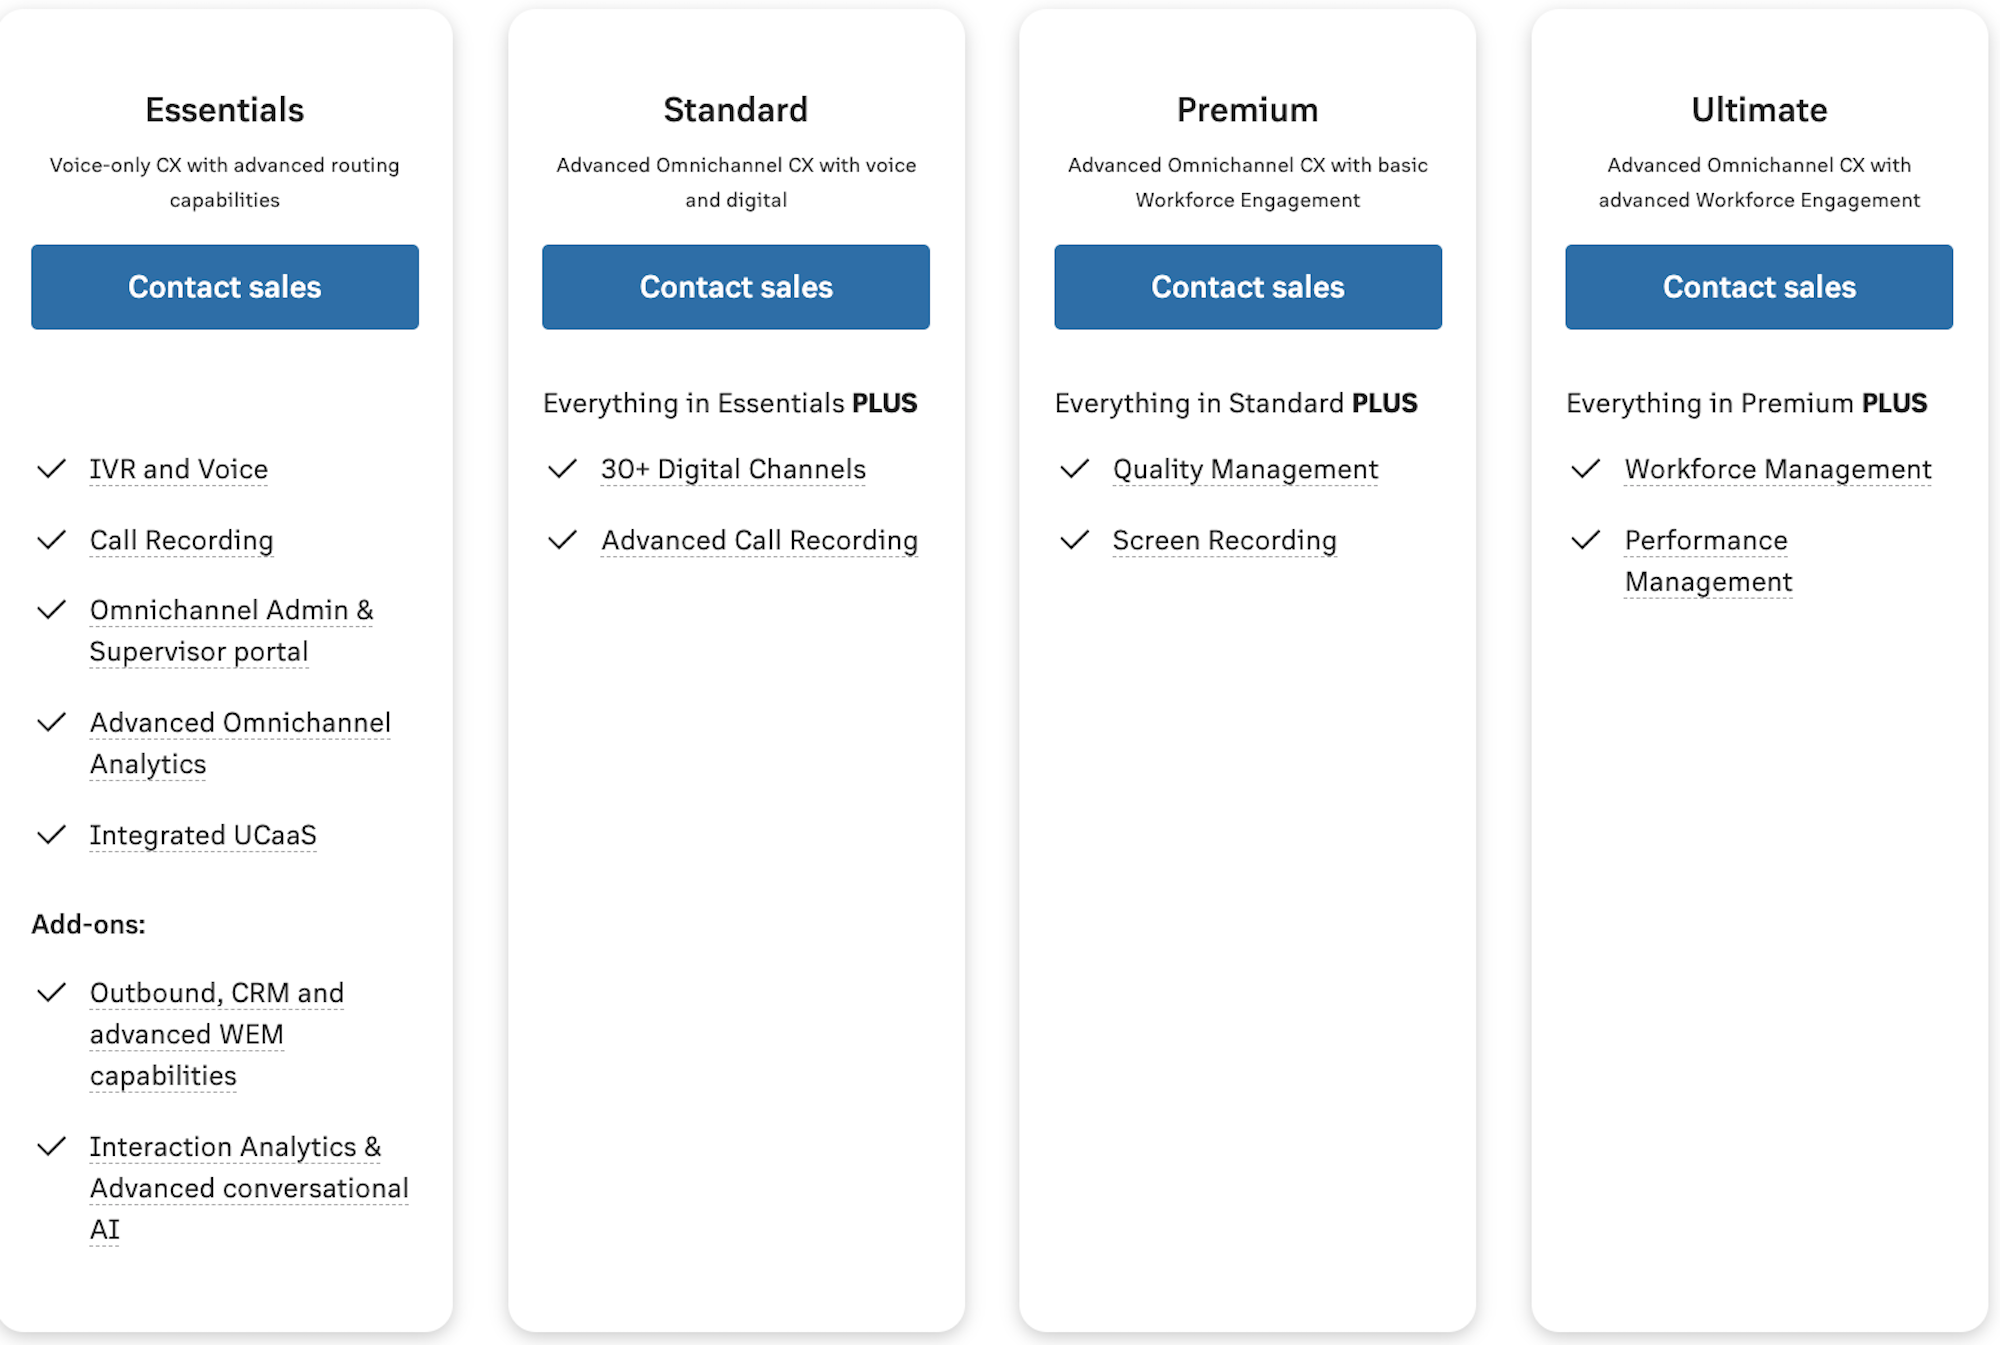 RingCentral Contact Center pricing plans